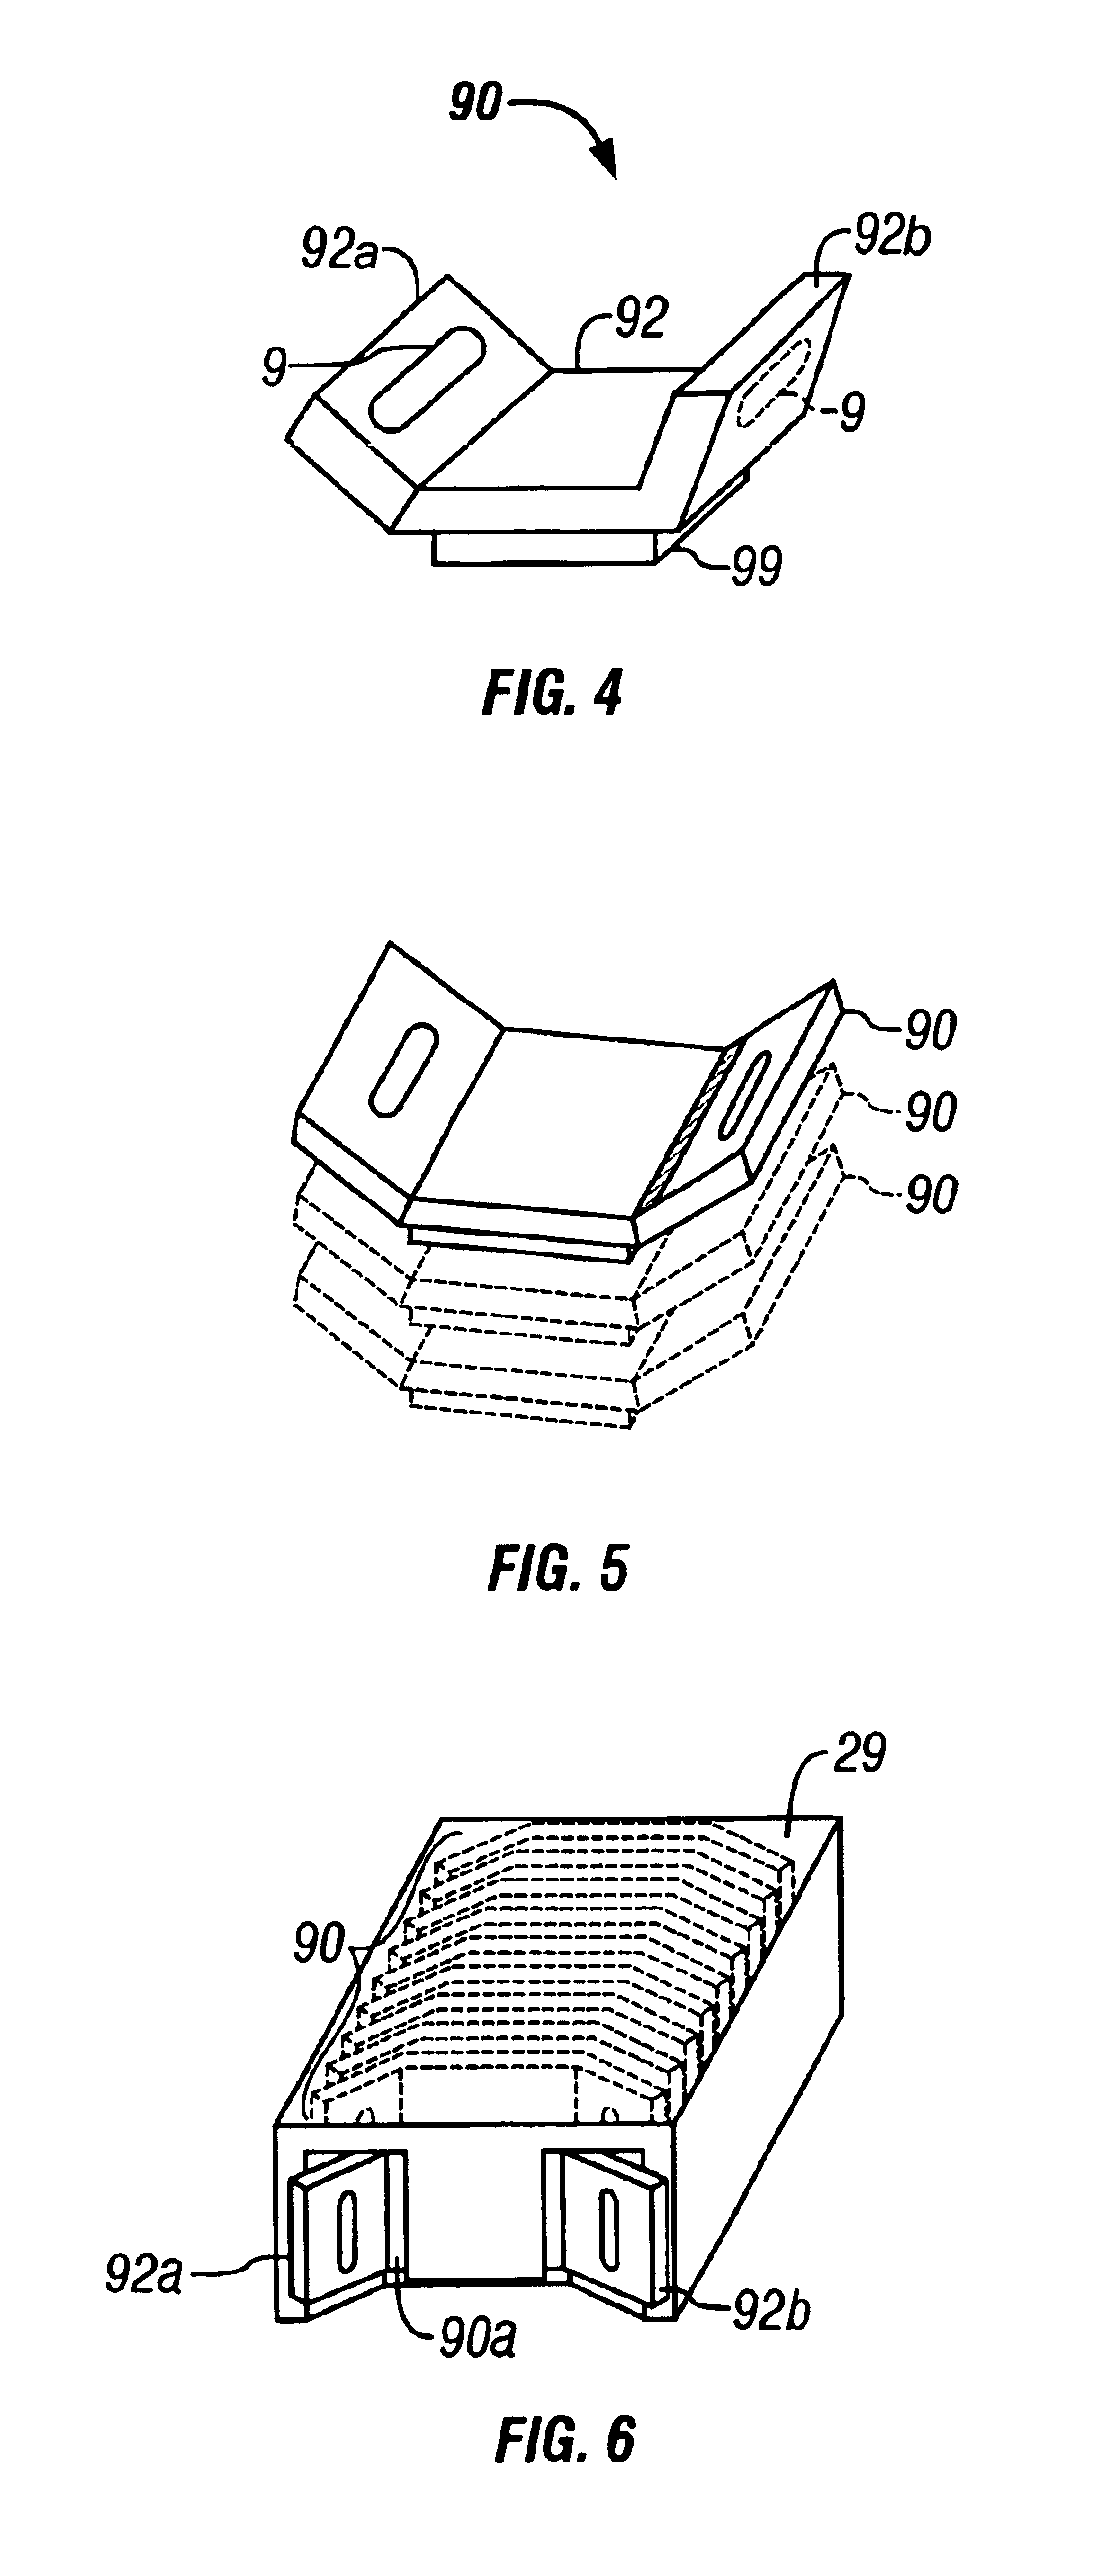 Analyte concentration determination devices and methods of using the same